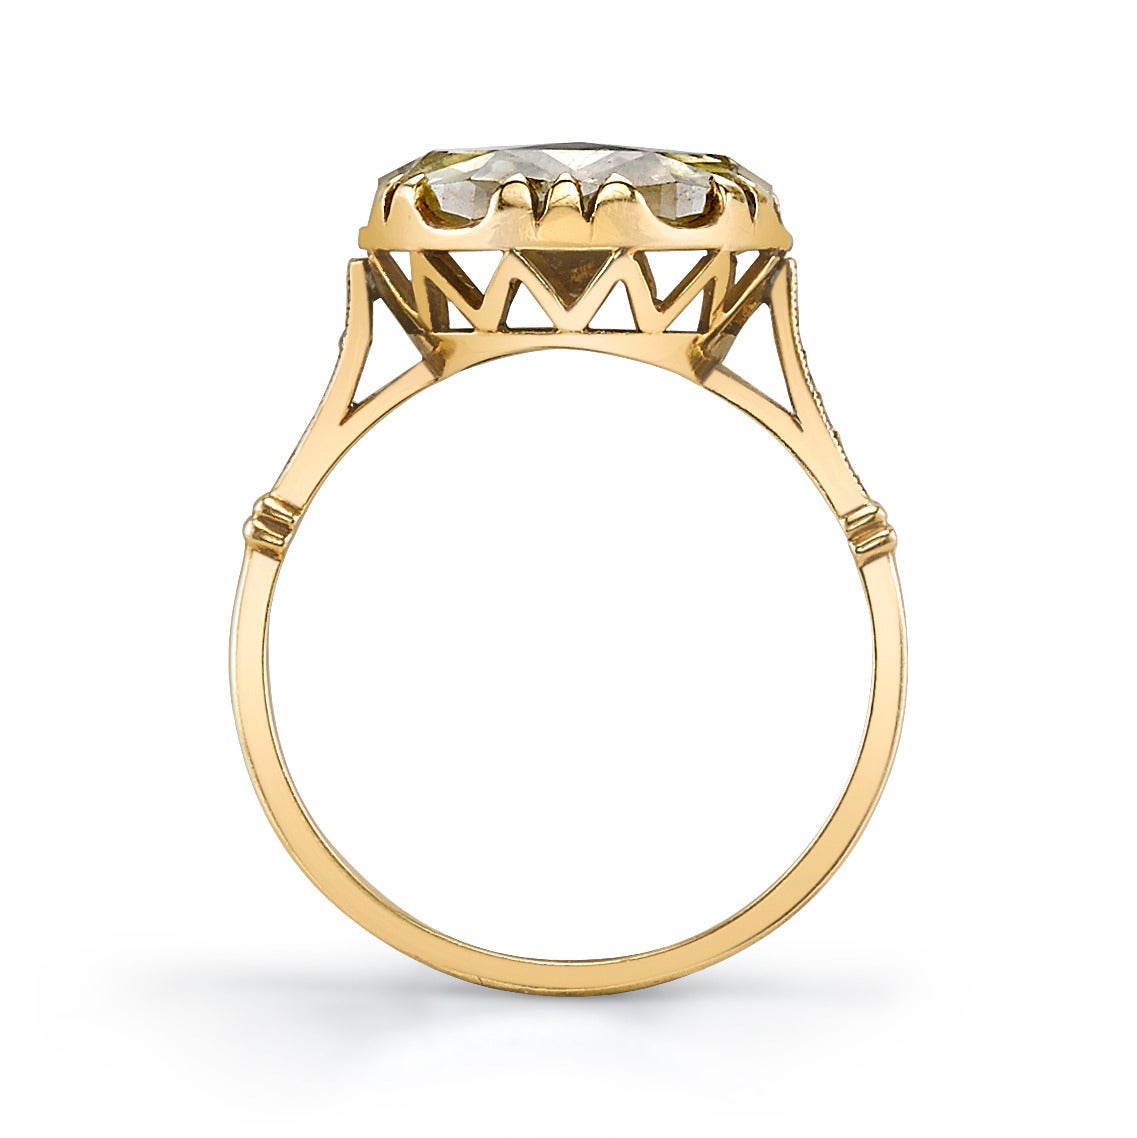 3.12ct Brown-Yellow/SI Rose cut diamond set in a handcrafted 18K oxidized yellow gold mounting. A unique center stone and unusual setting makes this a one of a kind design.